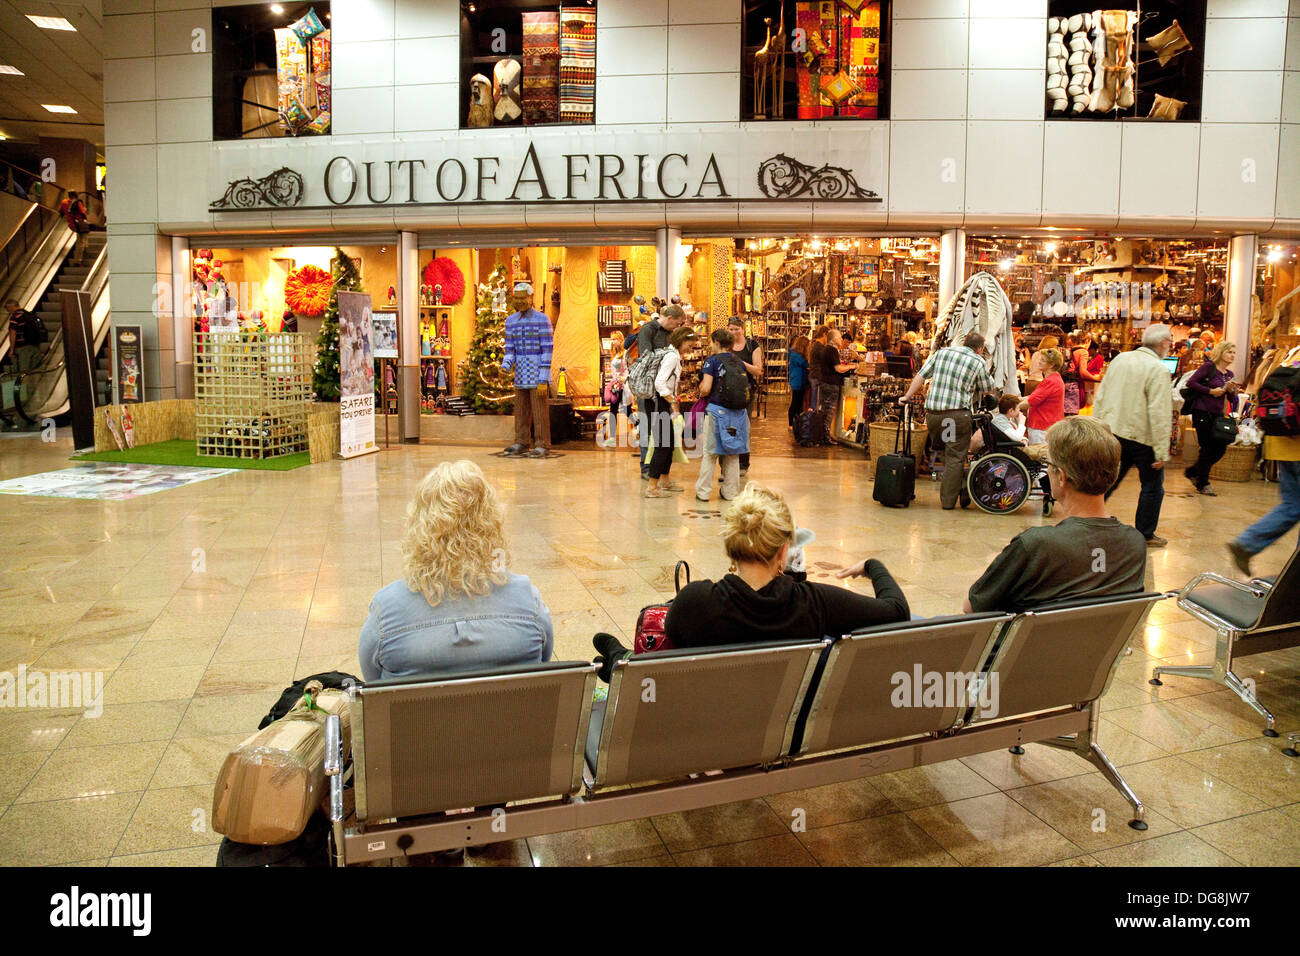 Johannesburg airport, departure lounge shops and duty free, O. R. Tambo International Airport, Johannesburg South Africa Stock Photo